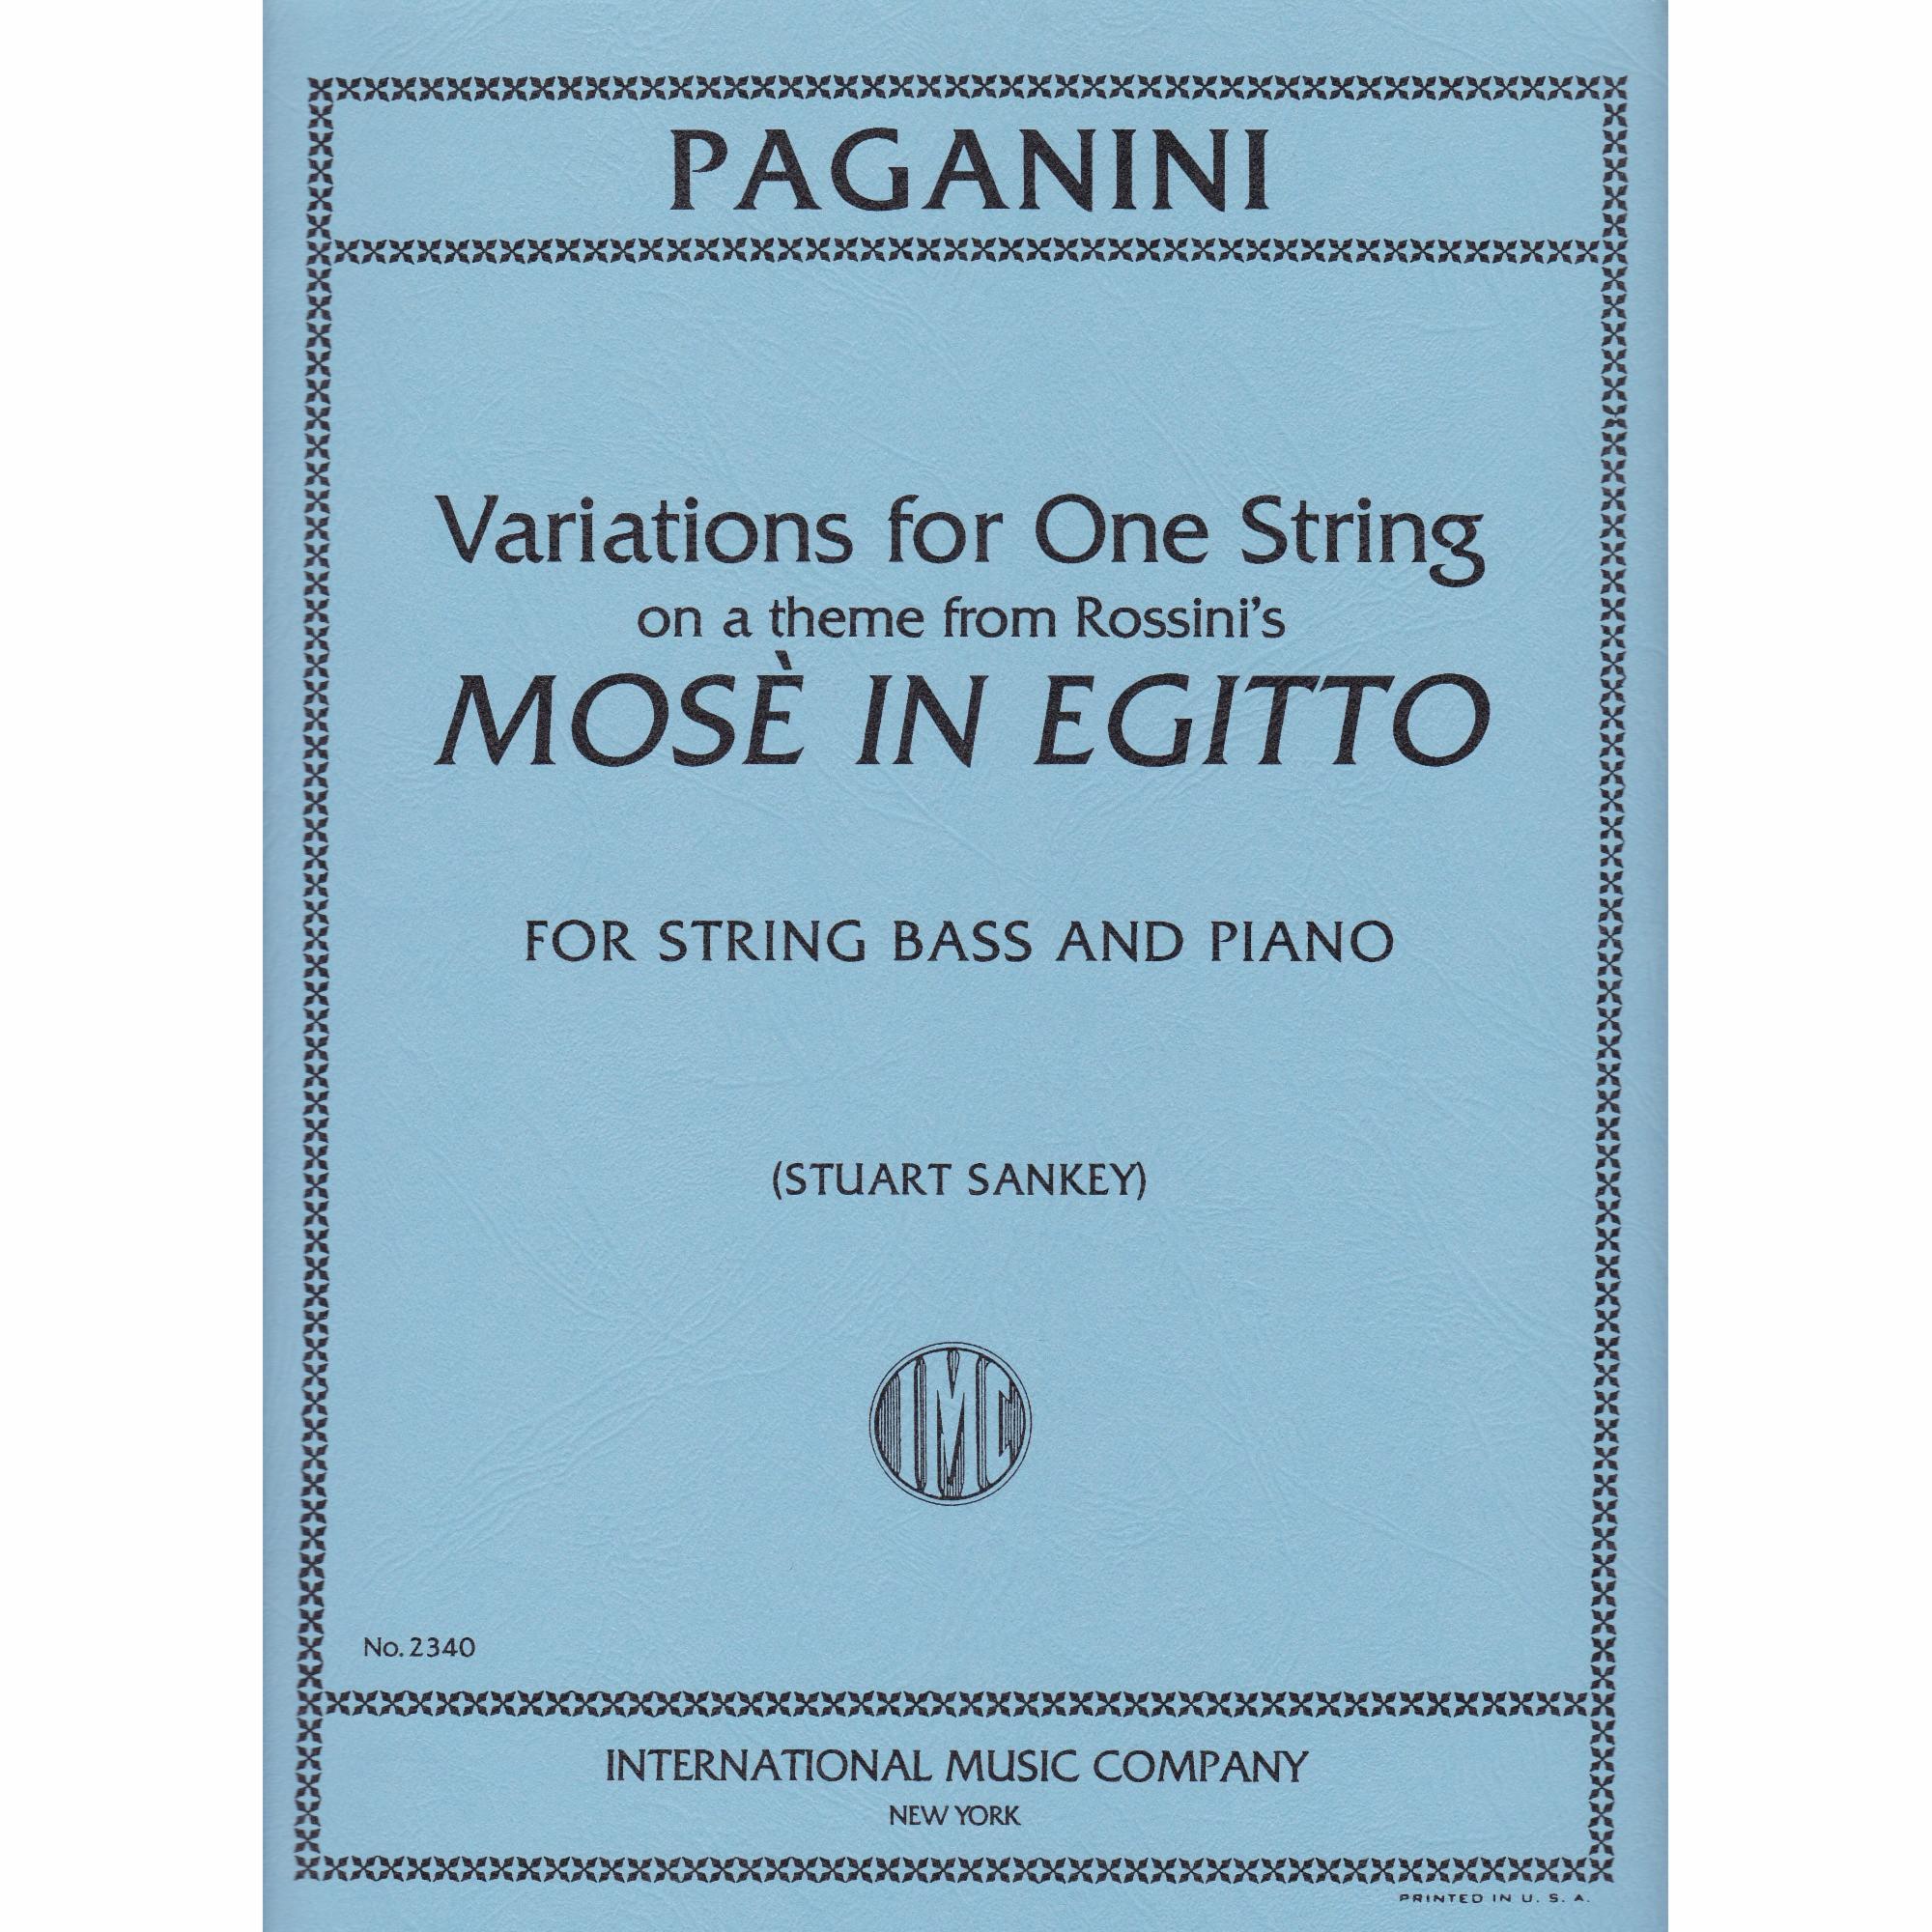 Rossini Variations on One String for Bass